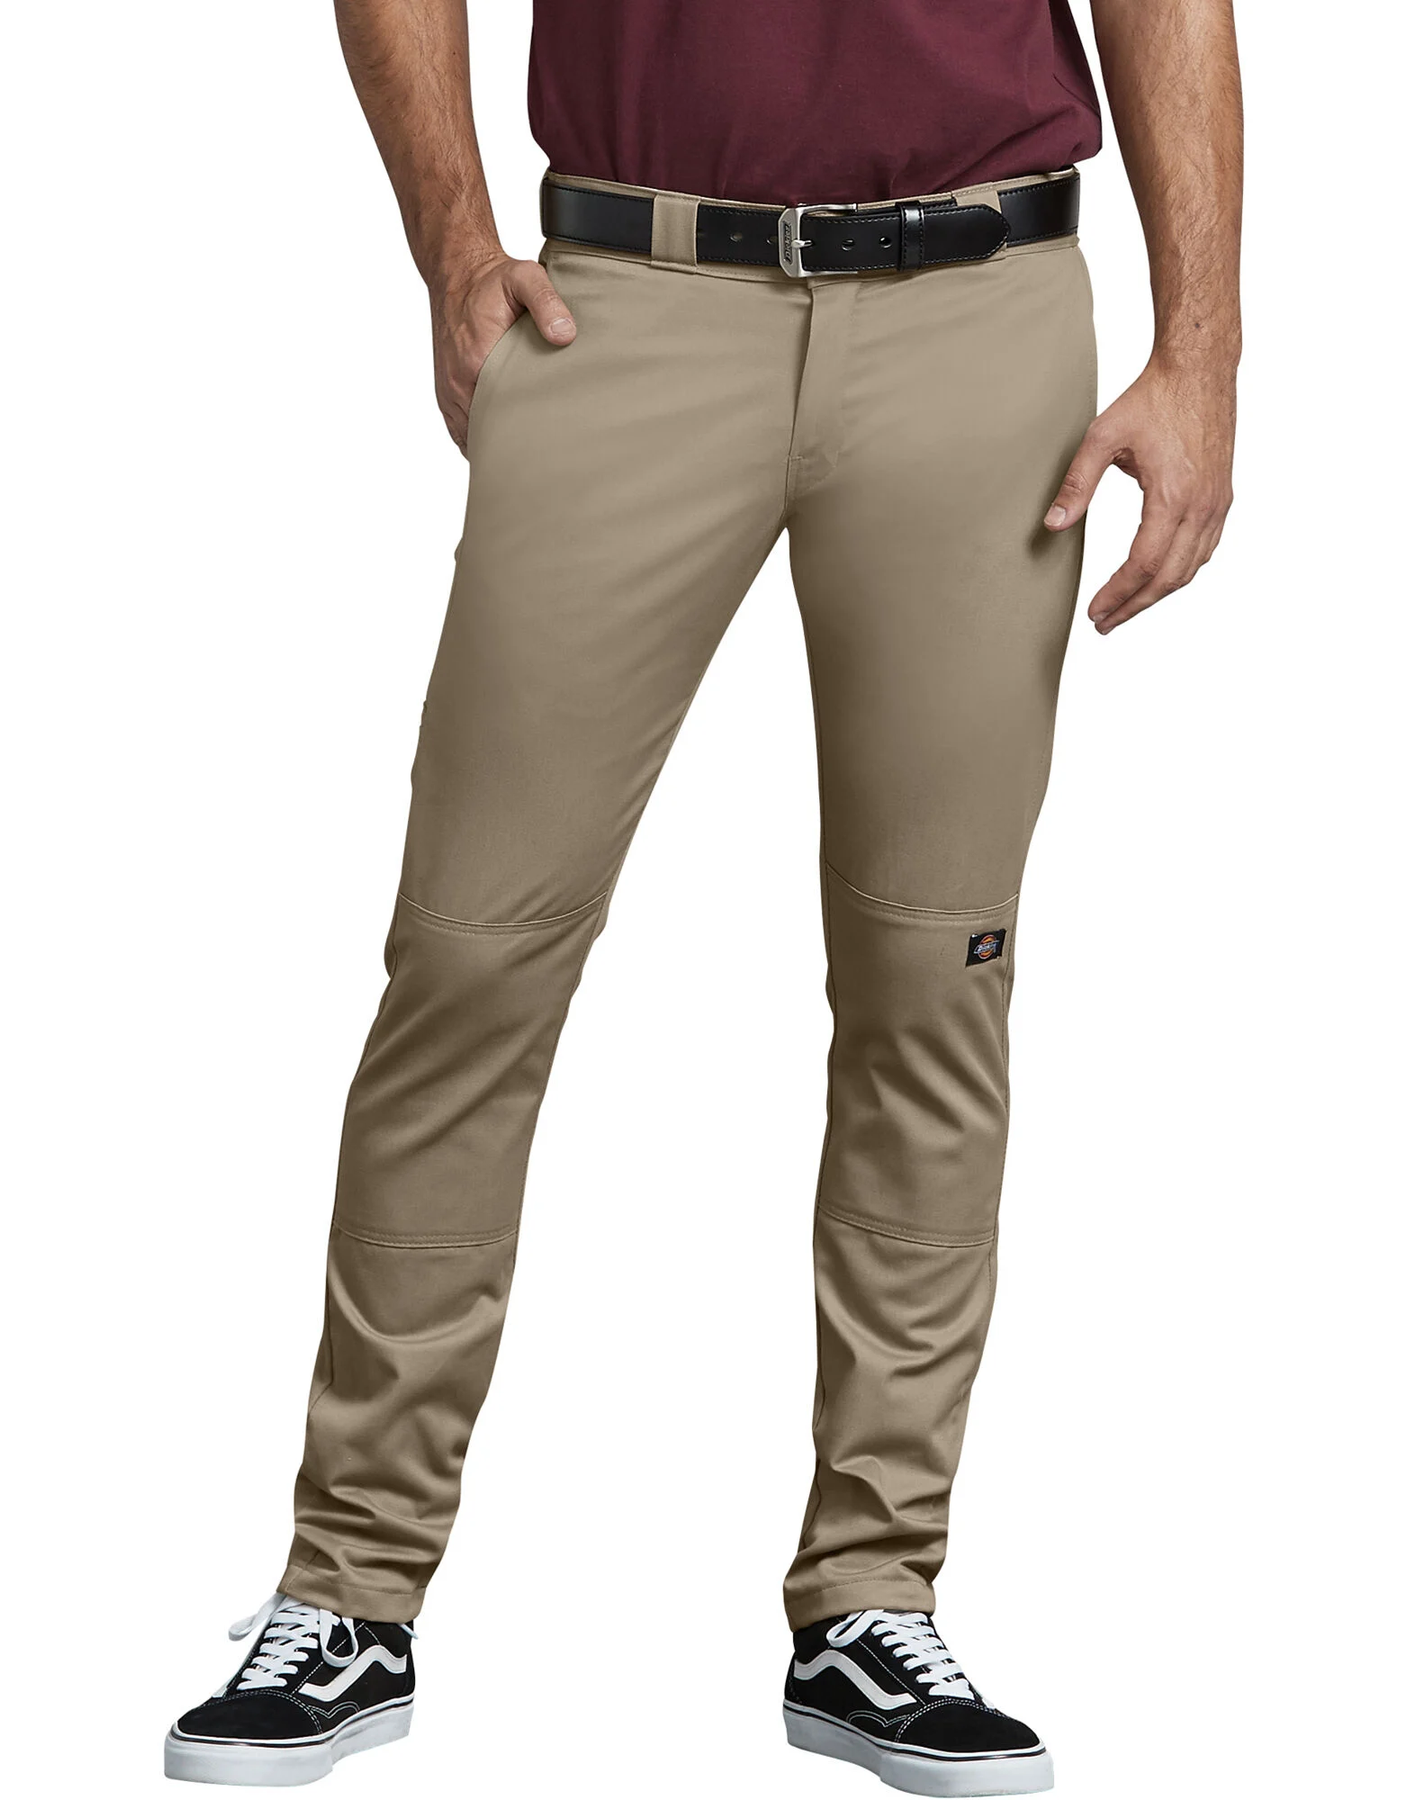 Stretch Slim Fit Twill Cargo Pants by Polo Ralph Lauren Online | THE ICONIC  | Australia